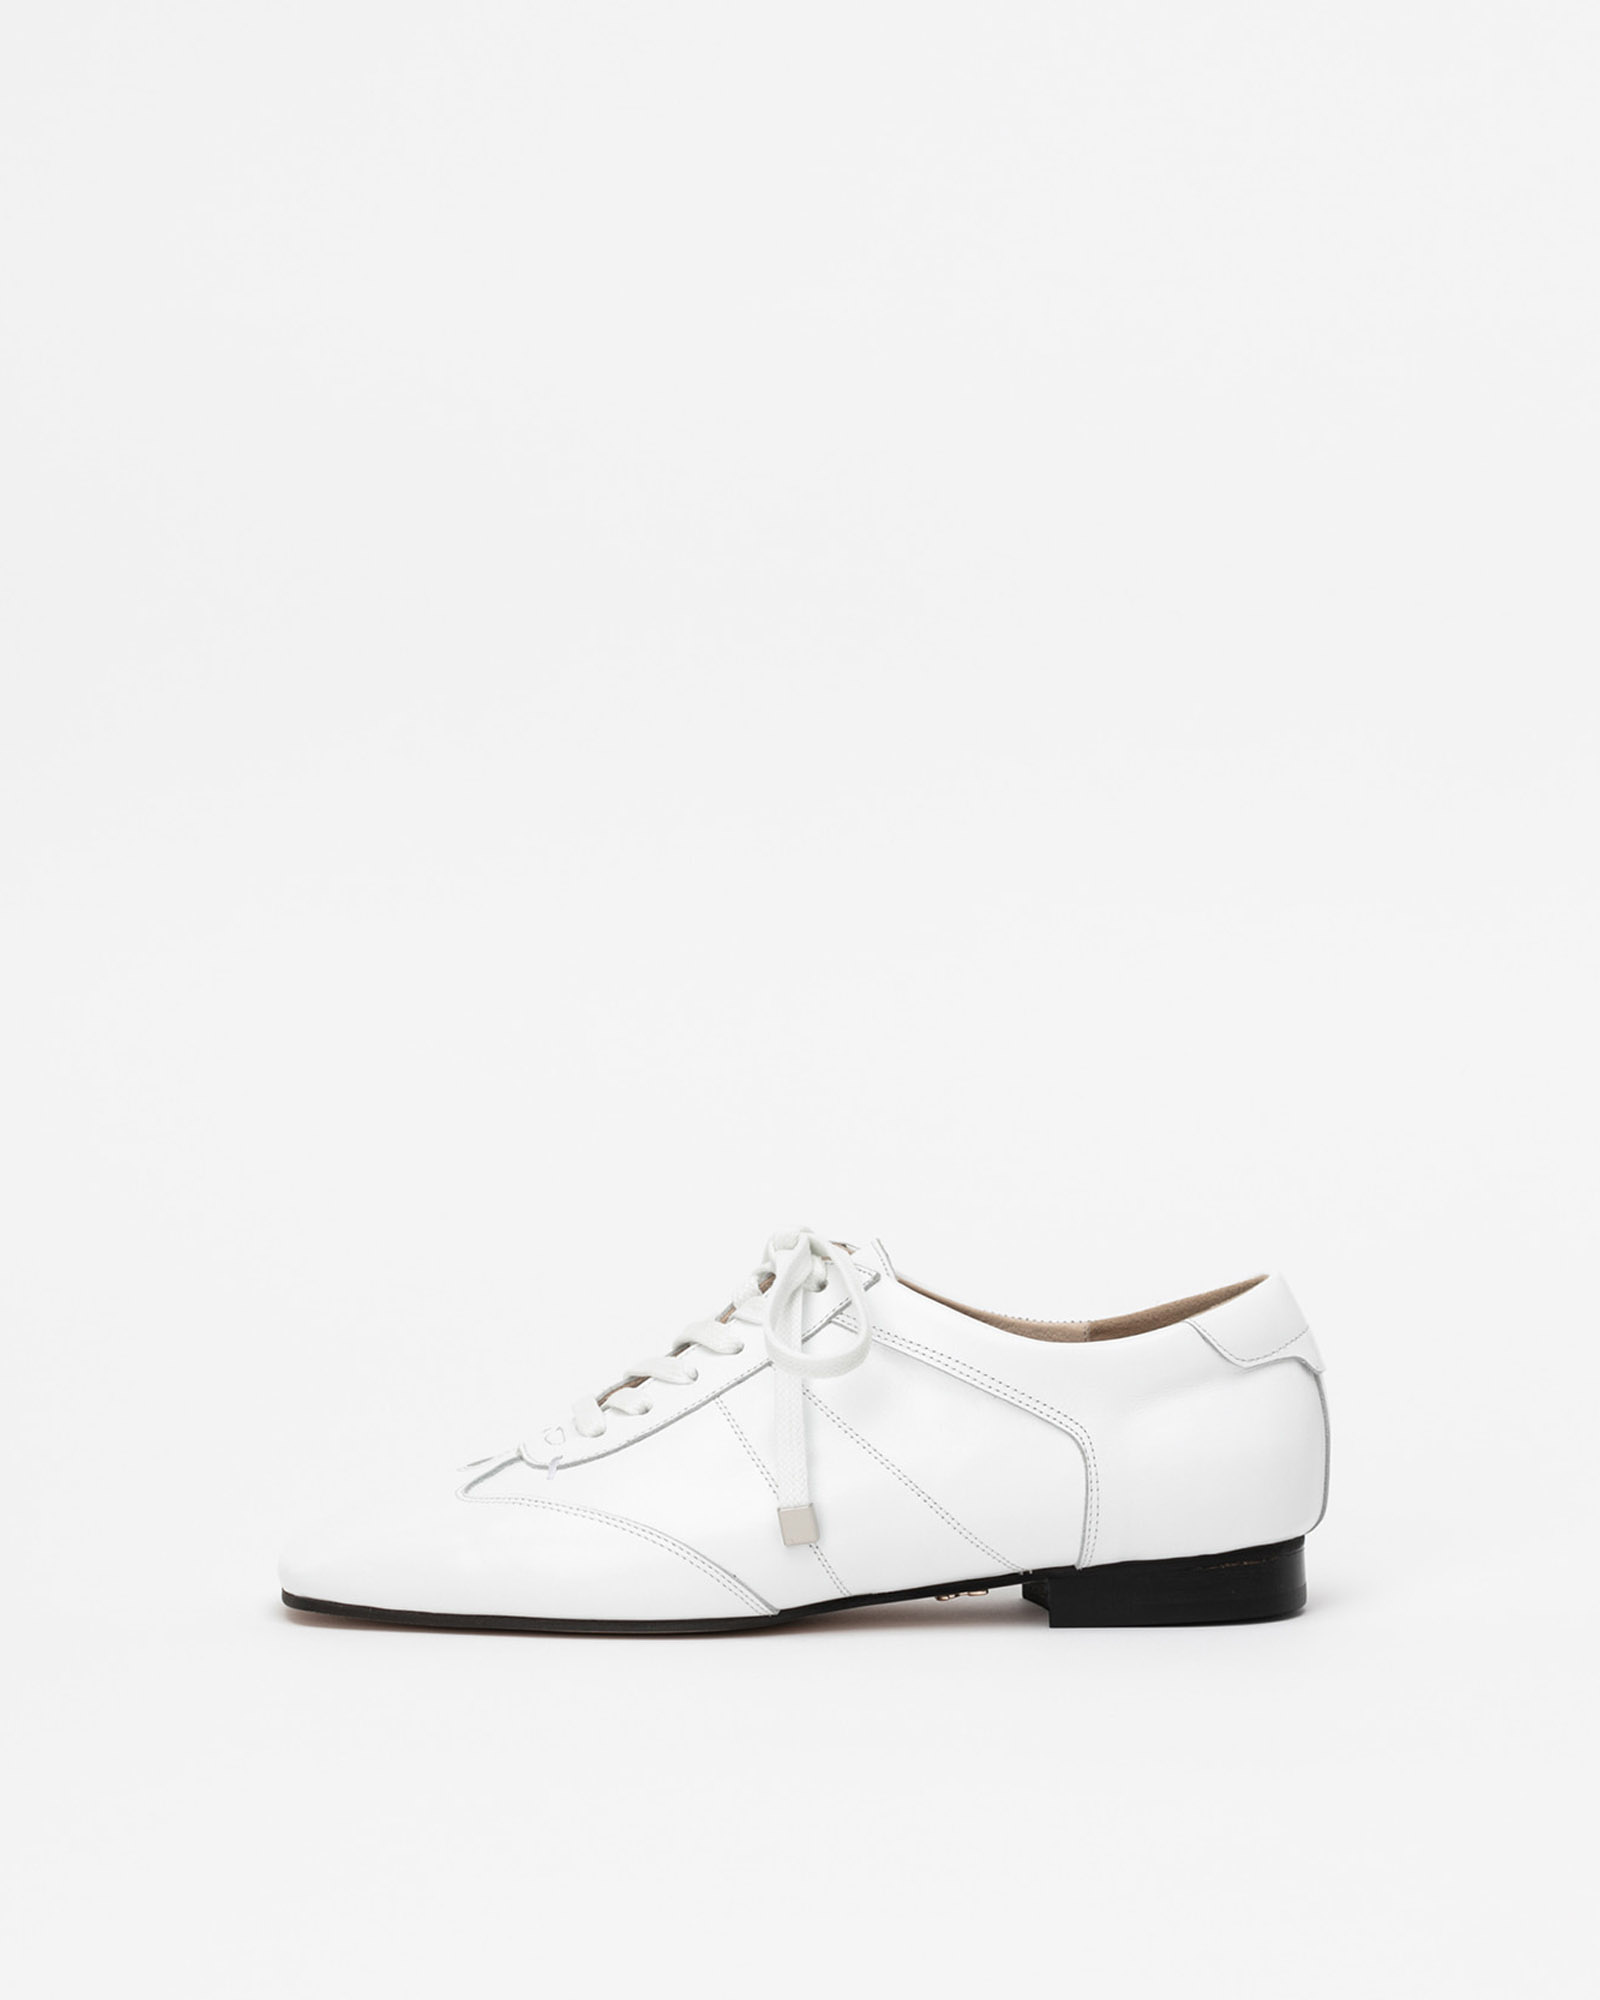 Vacon Lace-up Flat Shoes in Textured White